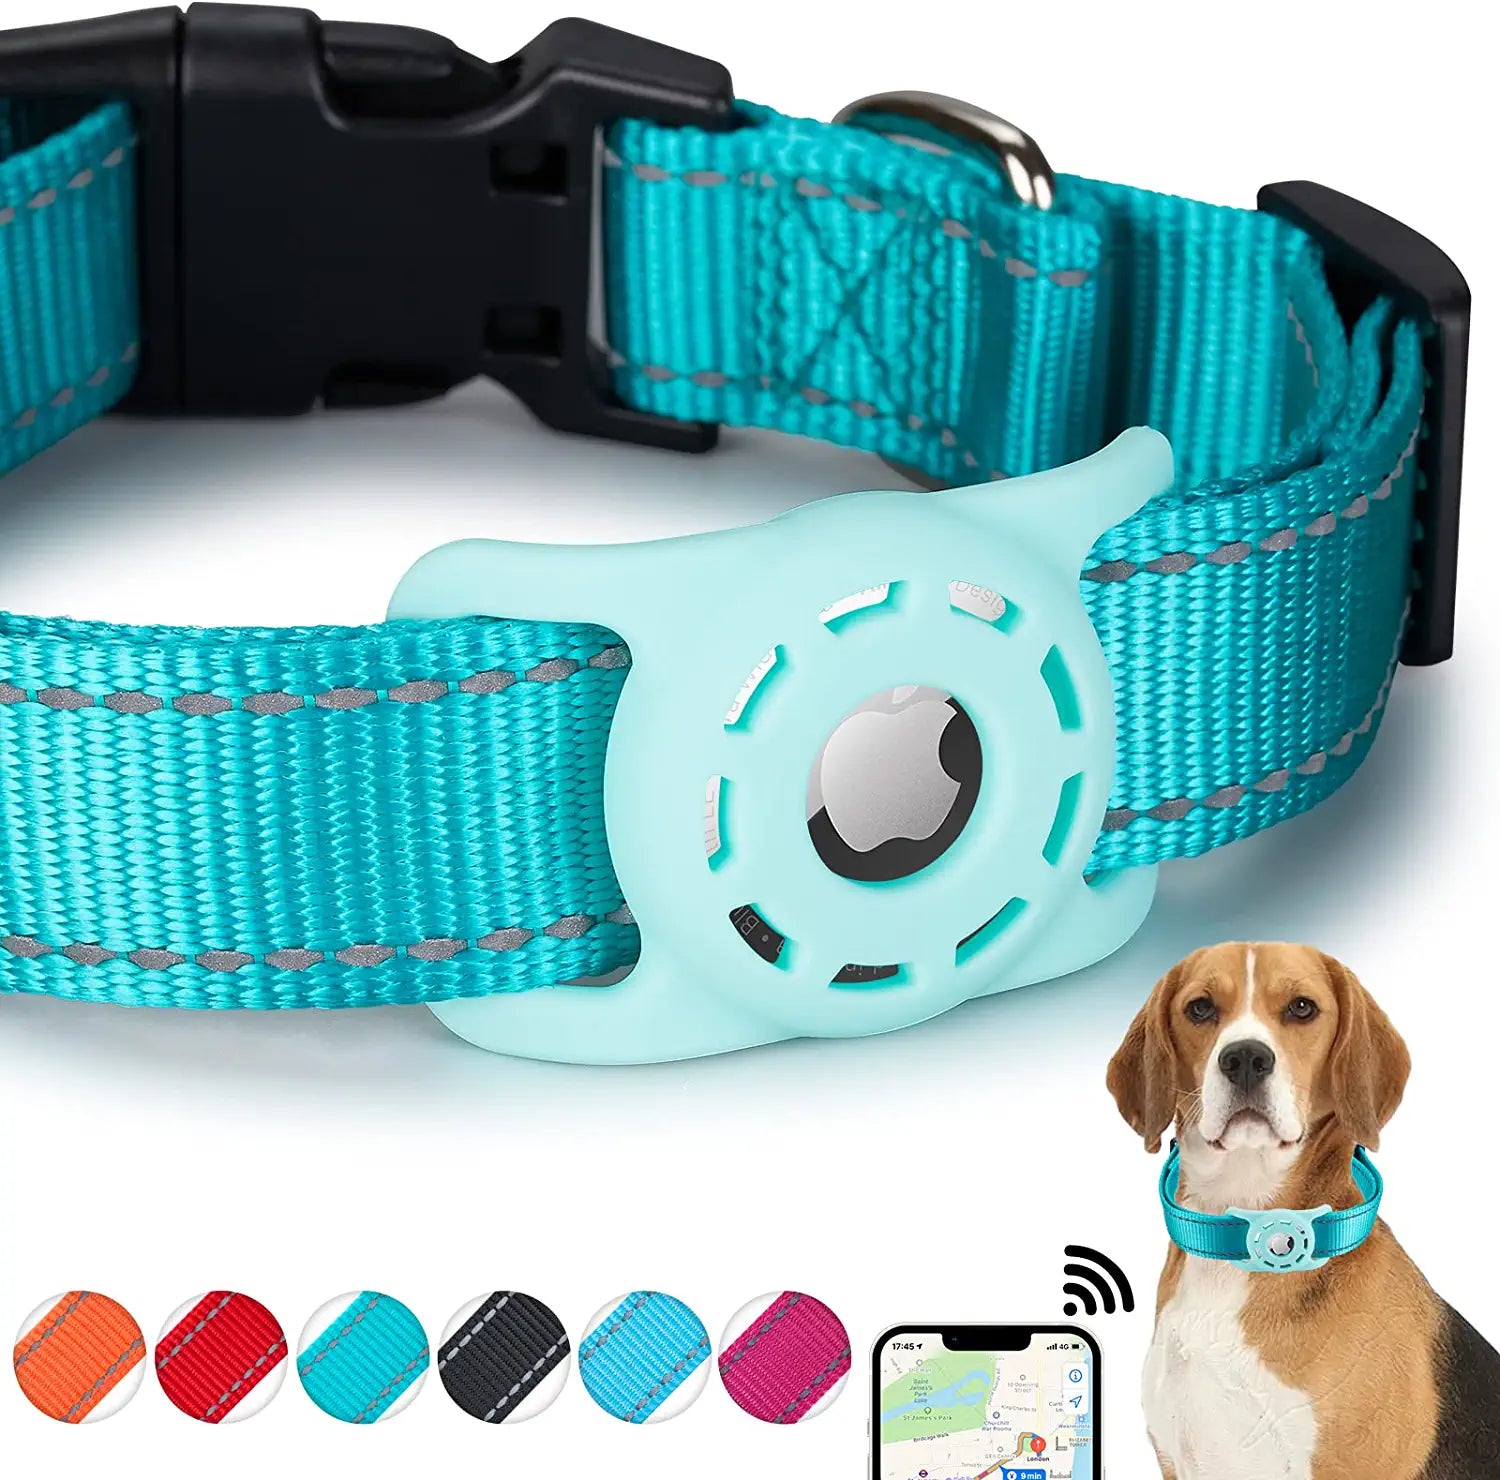 KONITY Reflective Airtag Dog Collar, Compatible with Apple Airtag, Nylon Pet Cat Puppy Collar with Silicone Airtag Holder for Small Medium Large Dogs